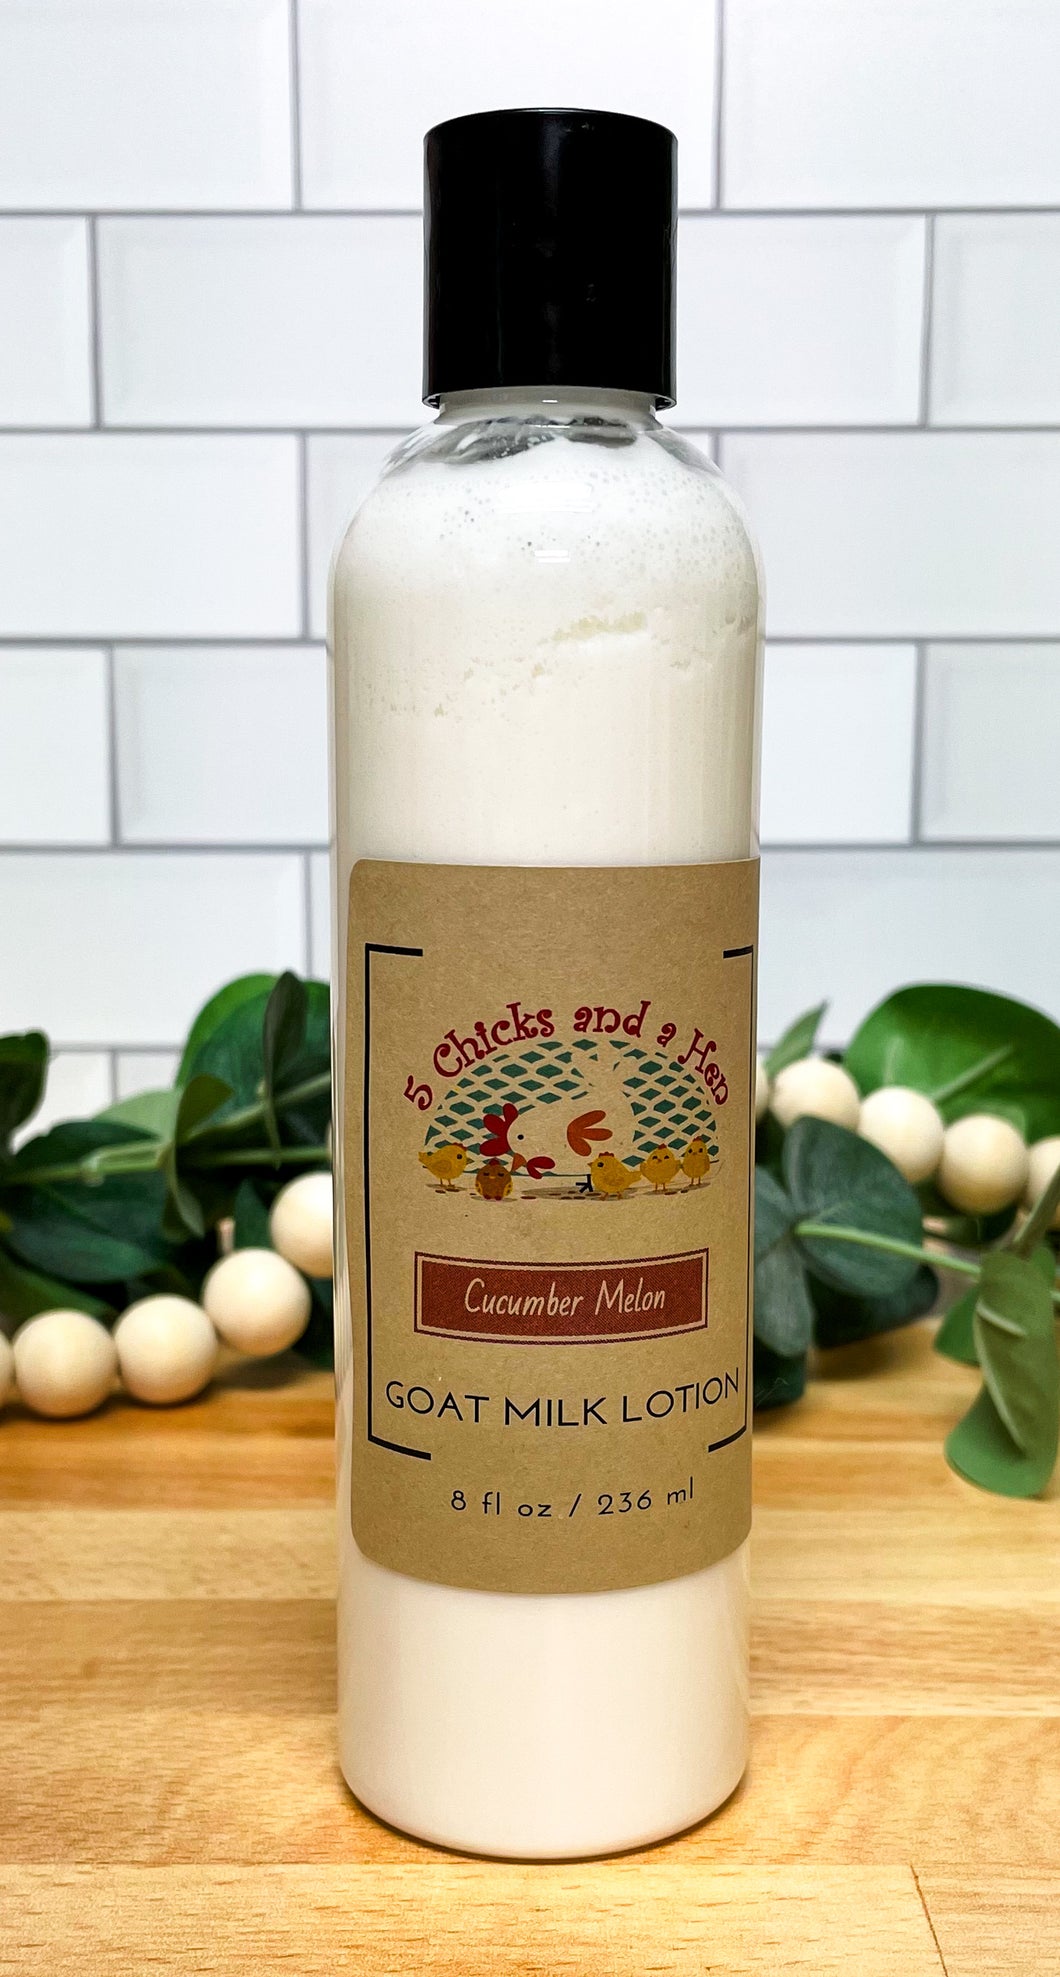 Cucumber Melon Handcrafted Goat Milk Lotion